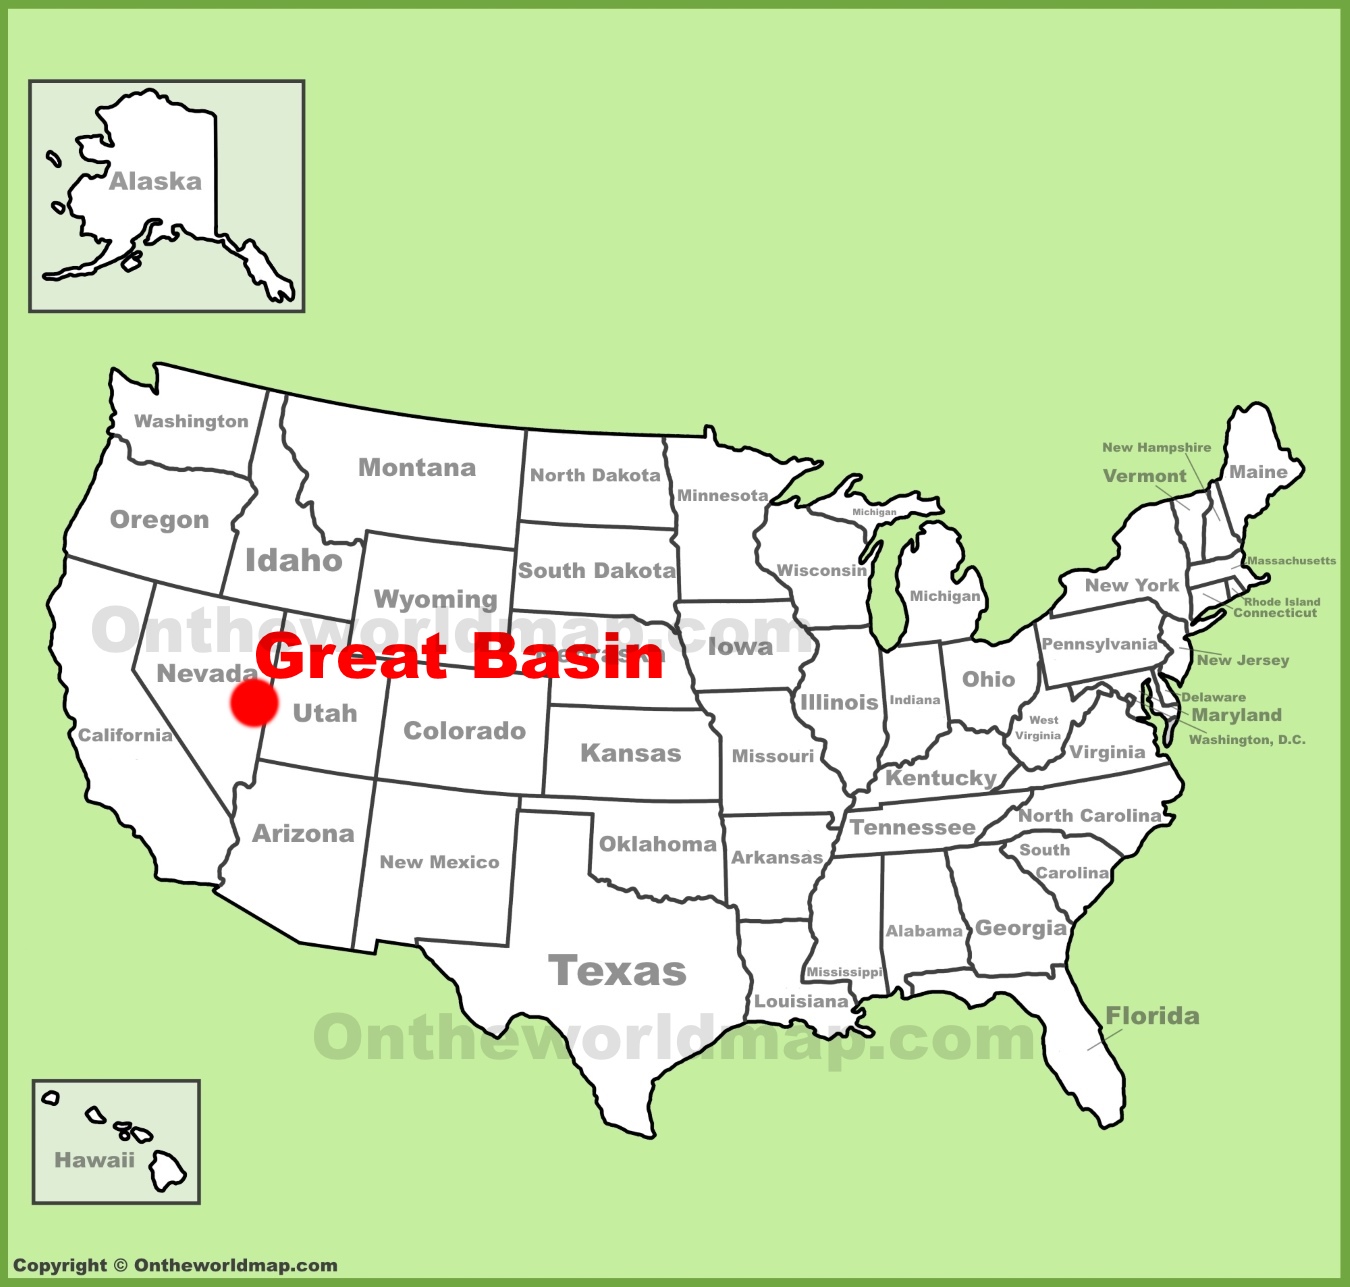 Great Basin Location On The U S Map